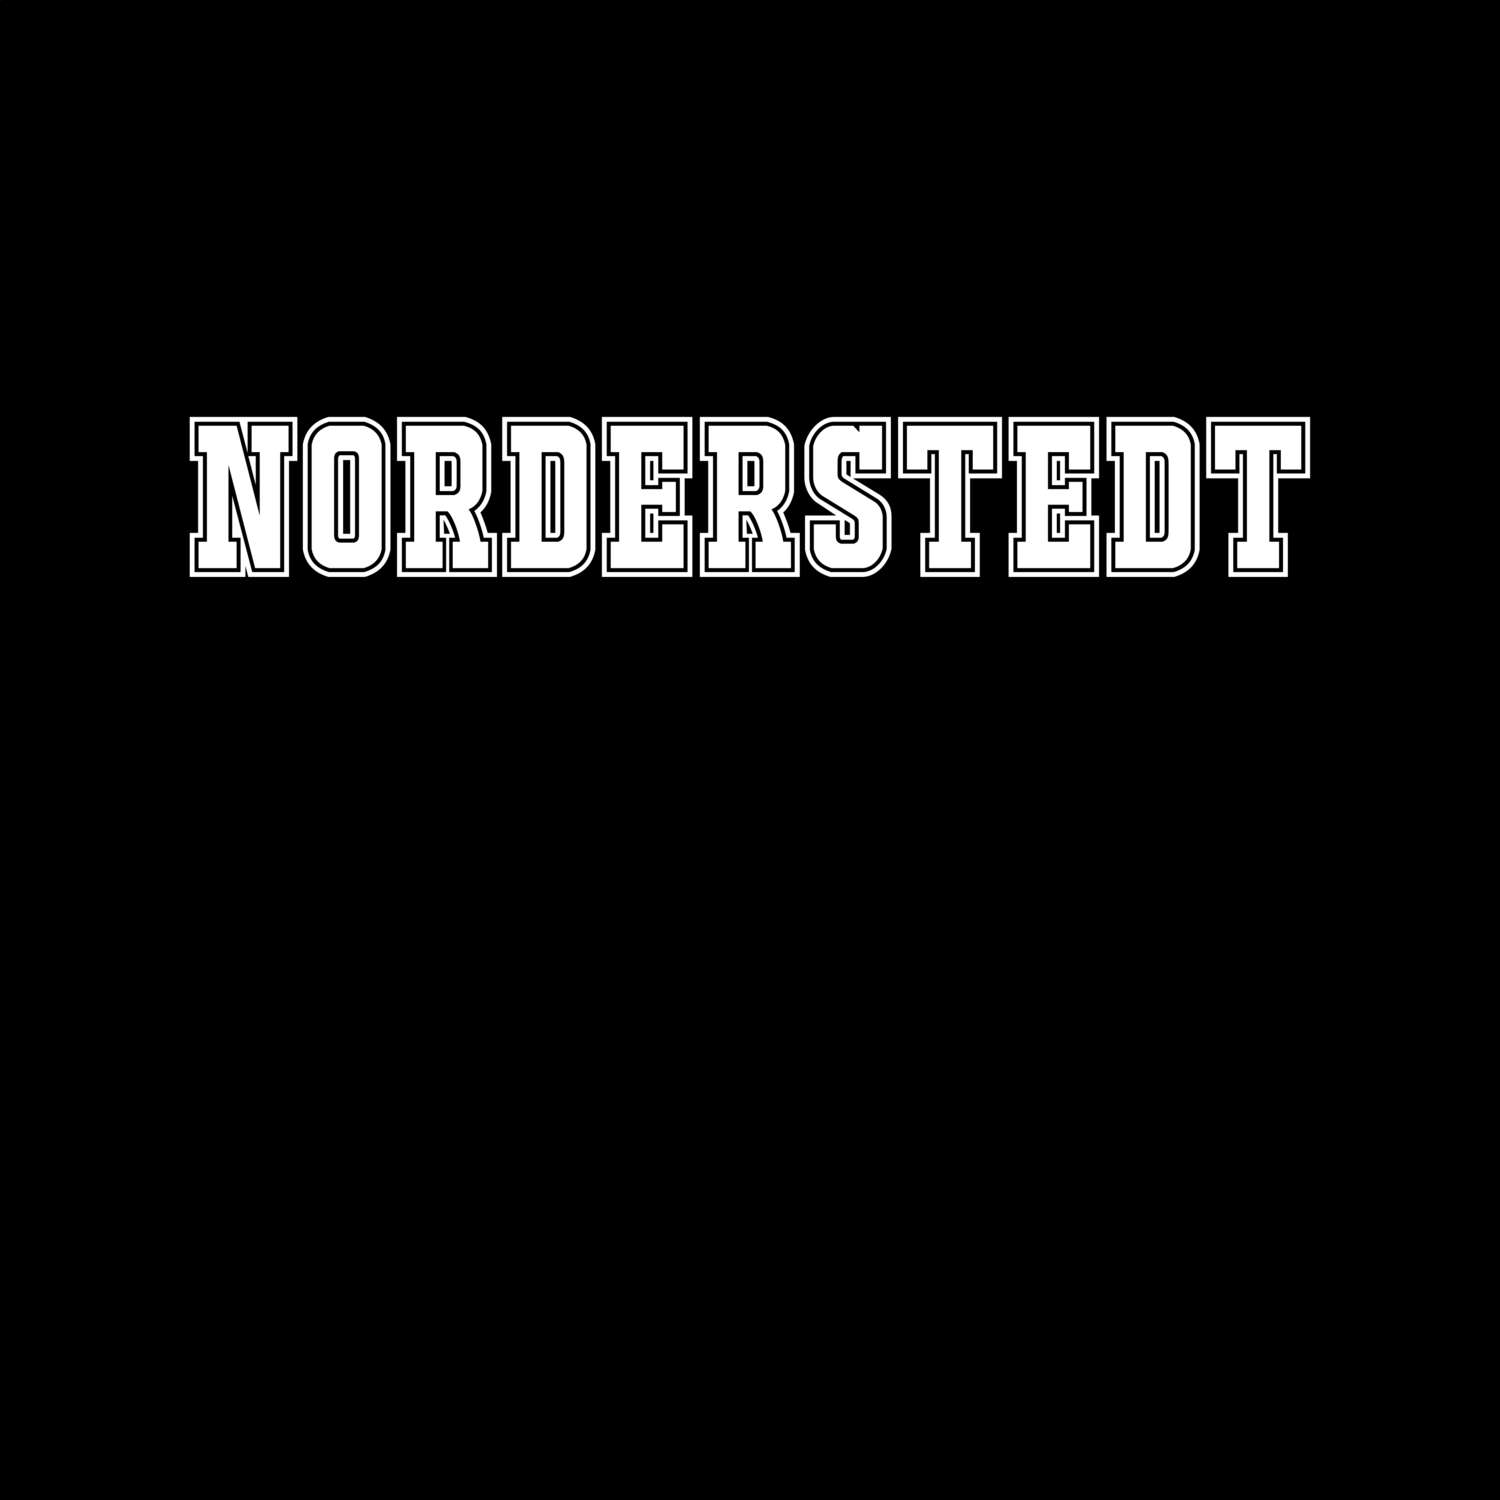 Norderstedt T-Shirt »Classic«